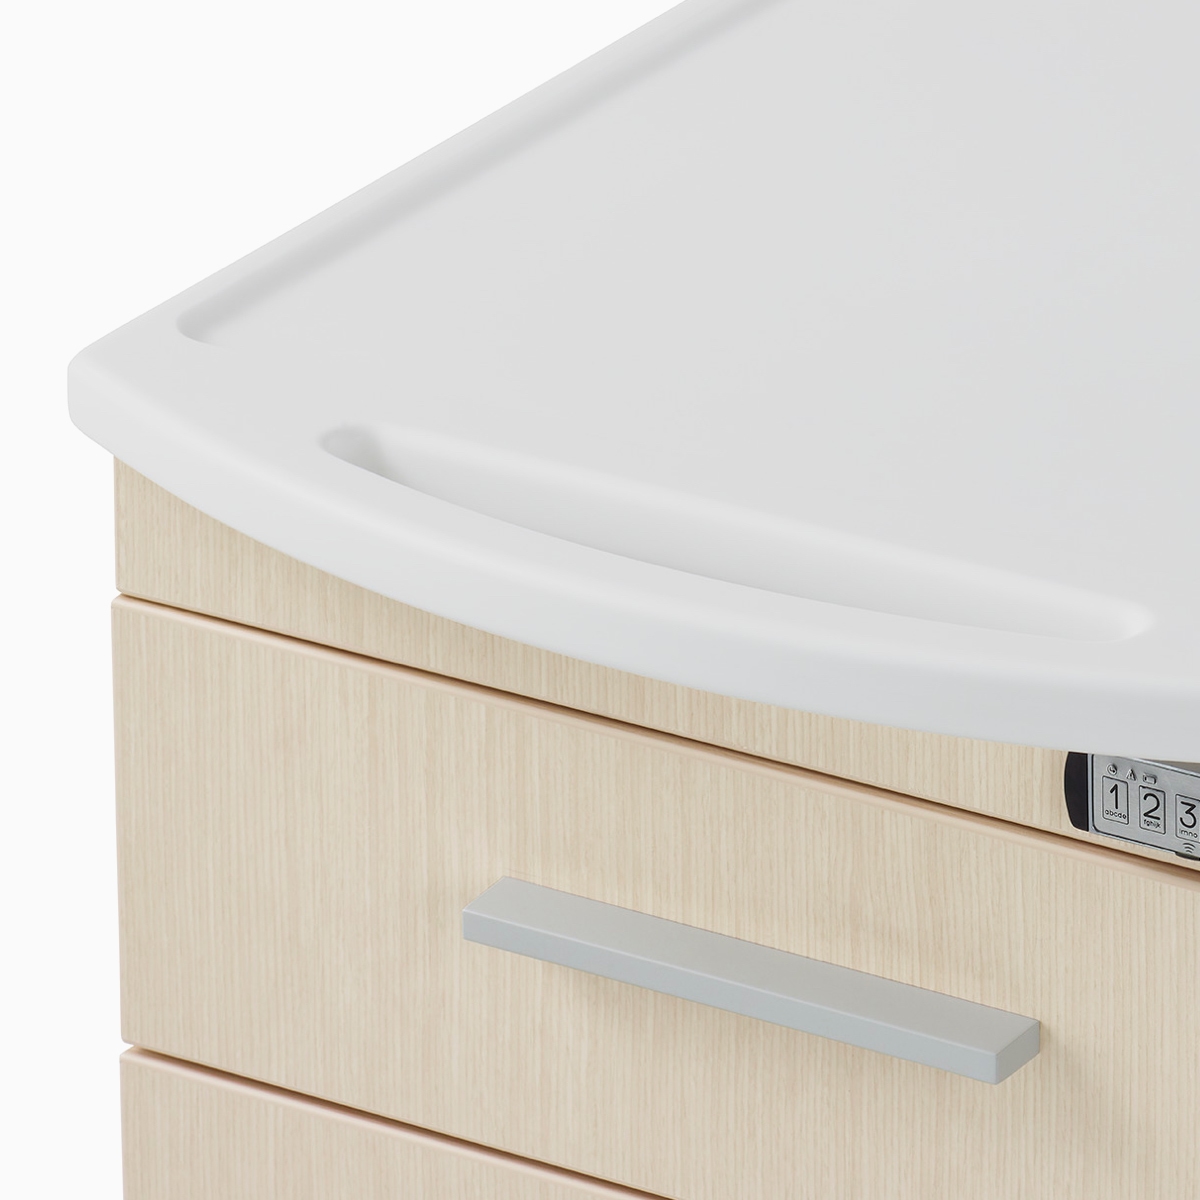 A close-up view of the integrated surface top and pull on a Mora casework supply cart.